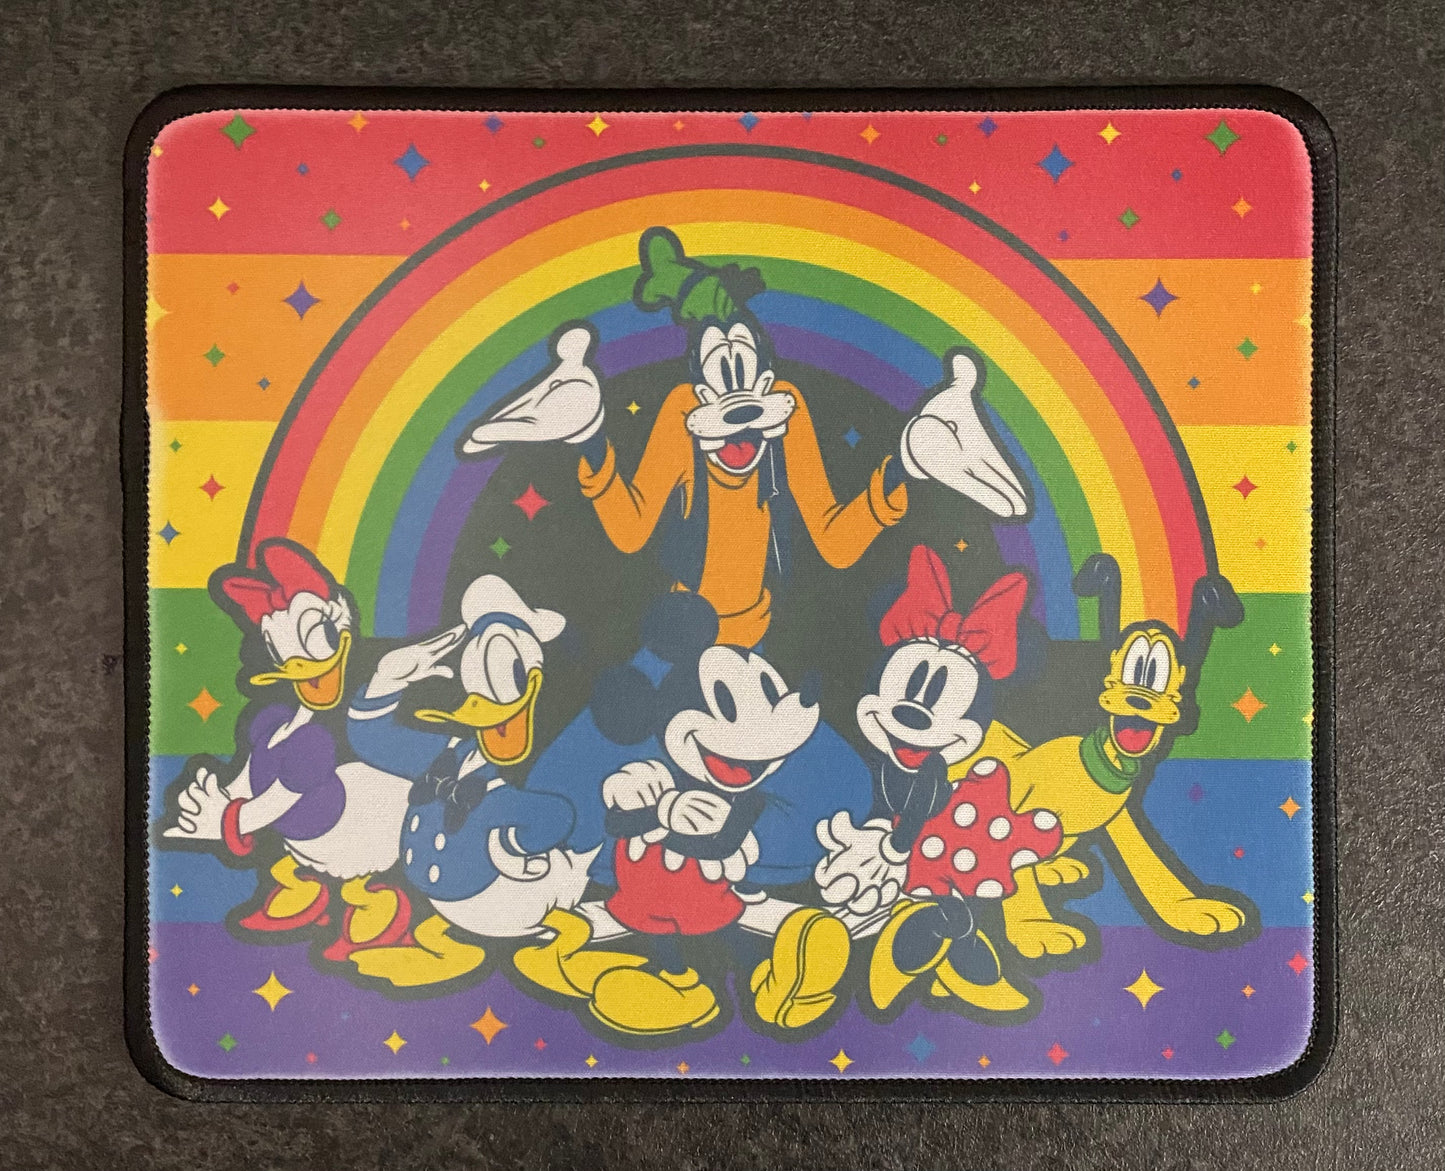 Mickey Mouse and Friends Design, Fabric Mouse Mat, Desk Saver, Gamer, Work, Computer